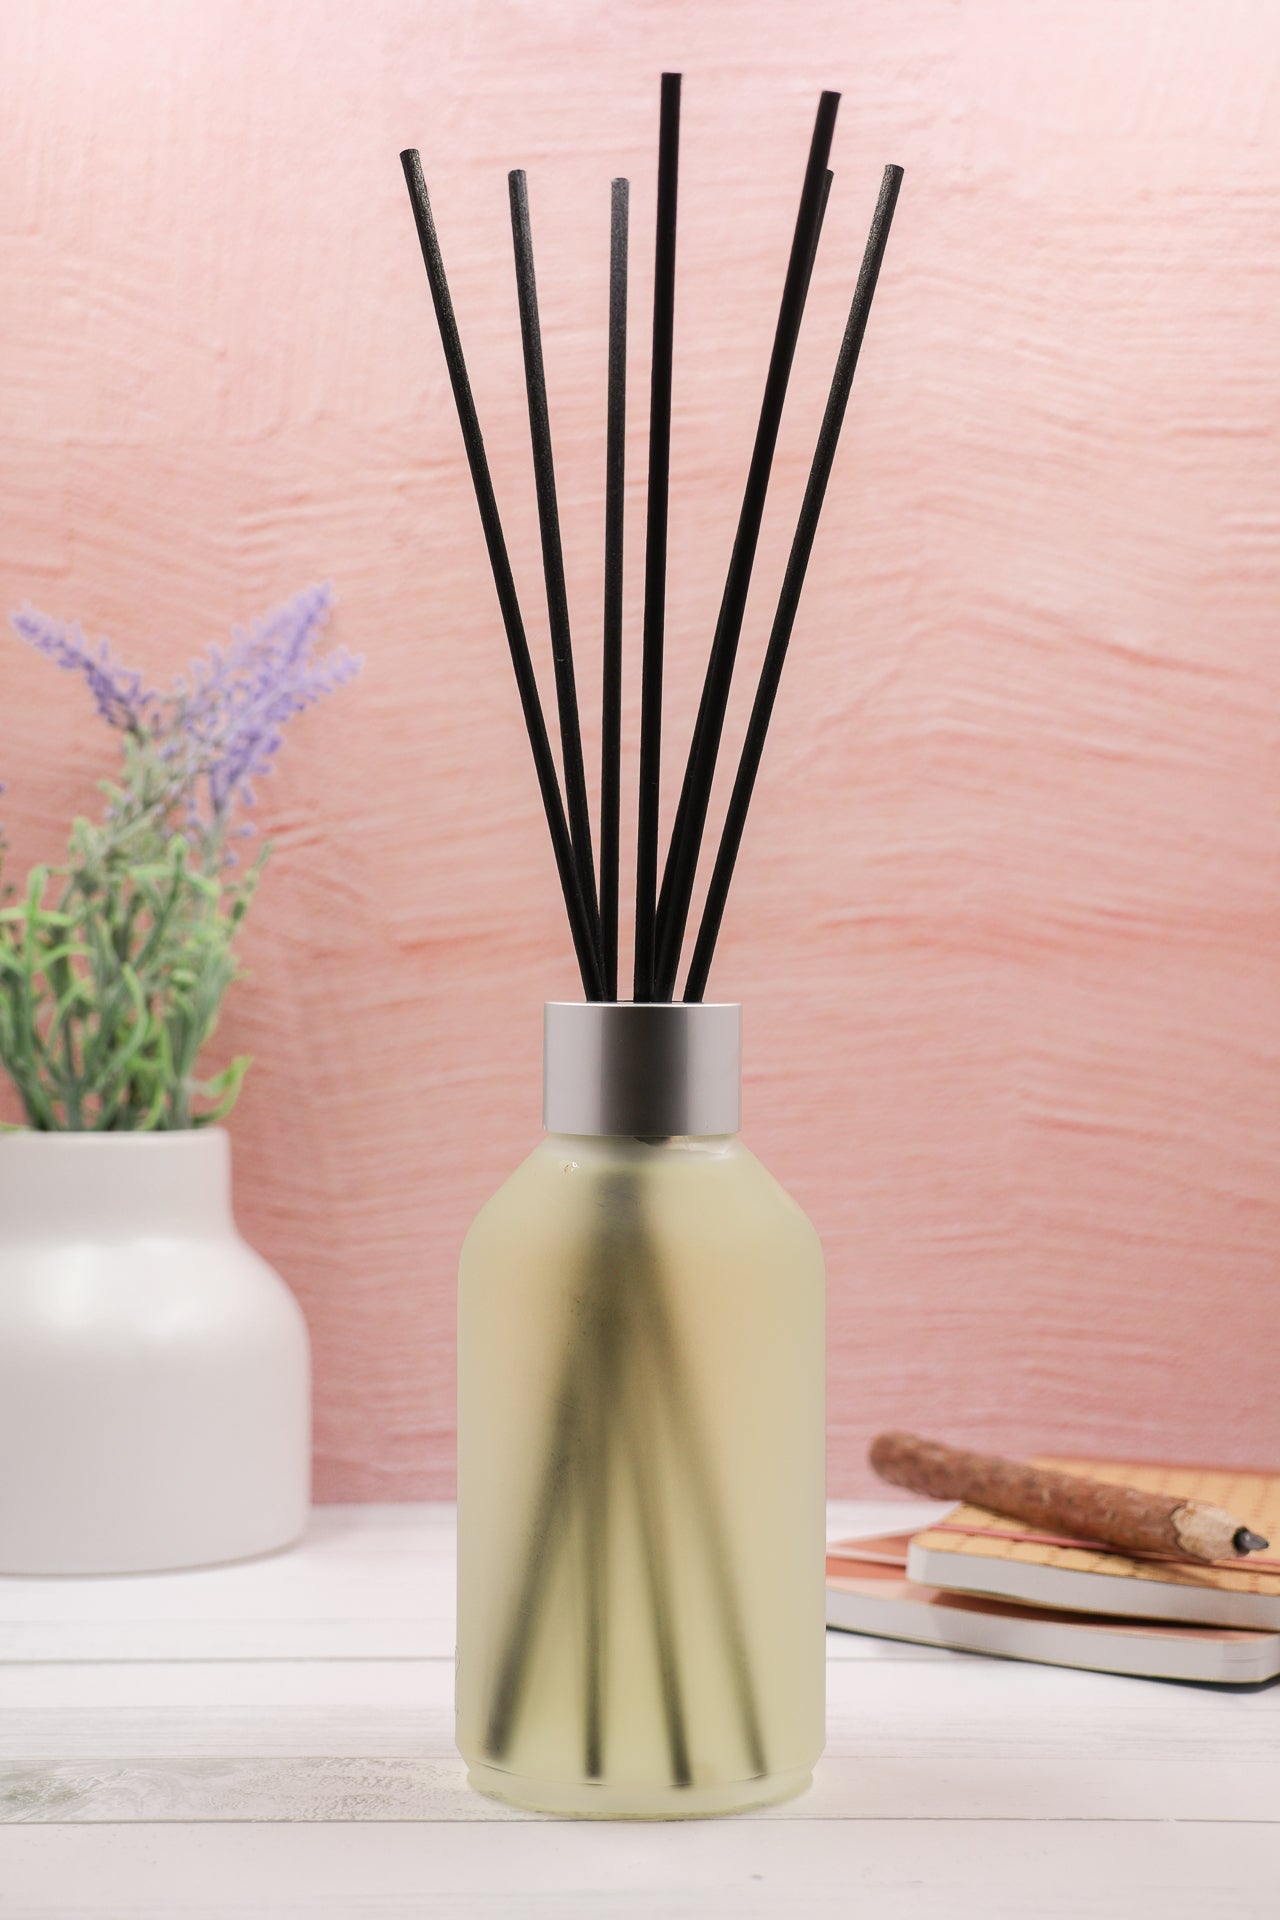 Crystal infused diffuser with wicks with the fragrance Camellia and Lotus Bloom